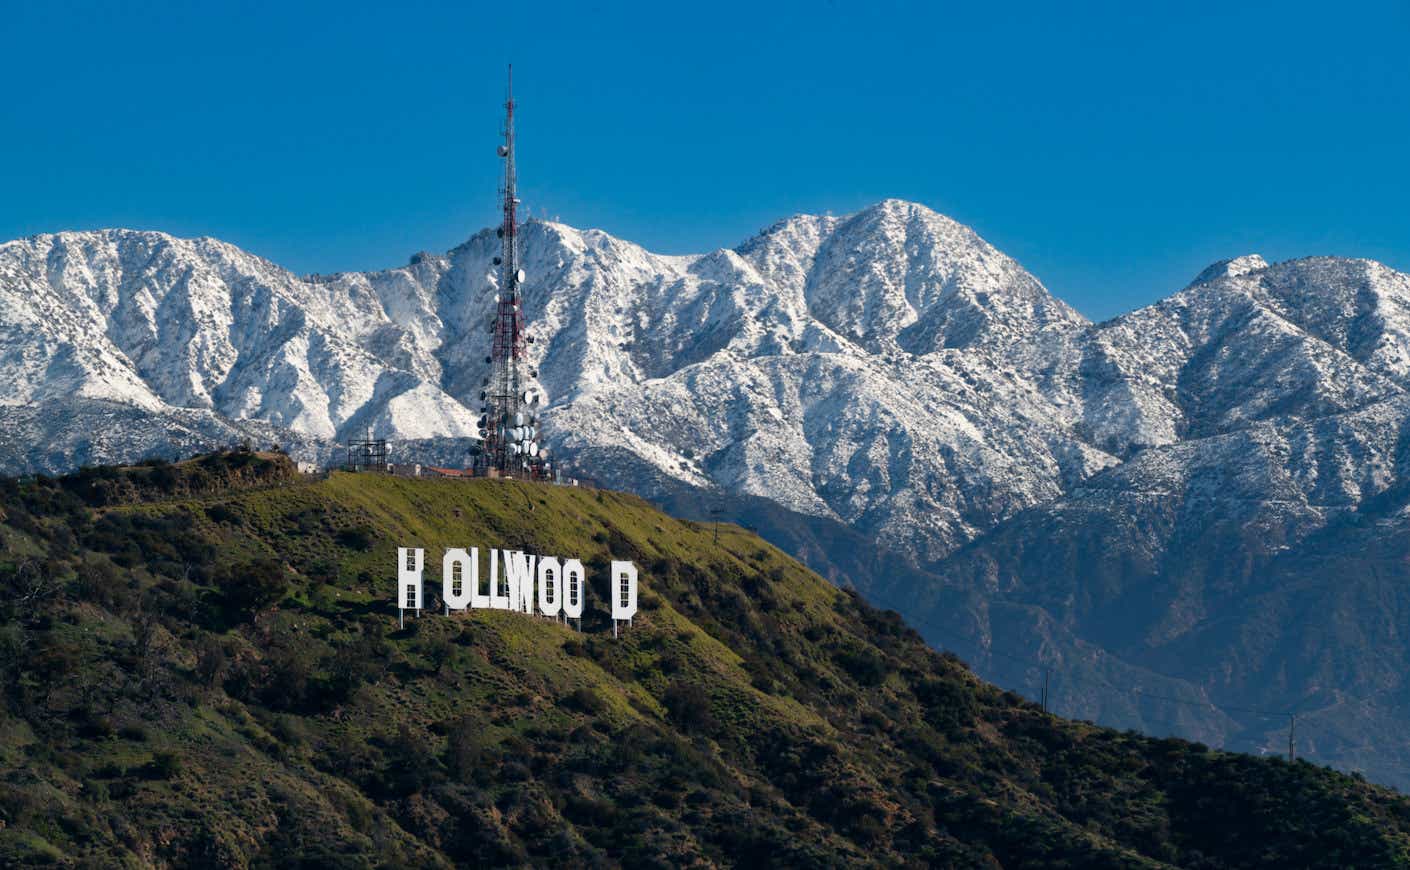 A view of the Hollywood Sign atop Mount Lee against the snow-covered San Gabriel Mountains on March 02, 2023